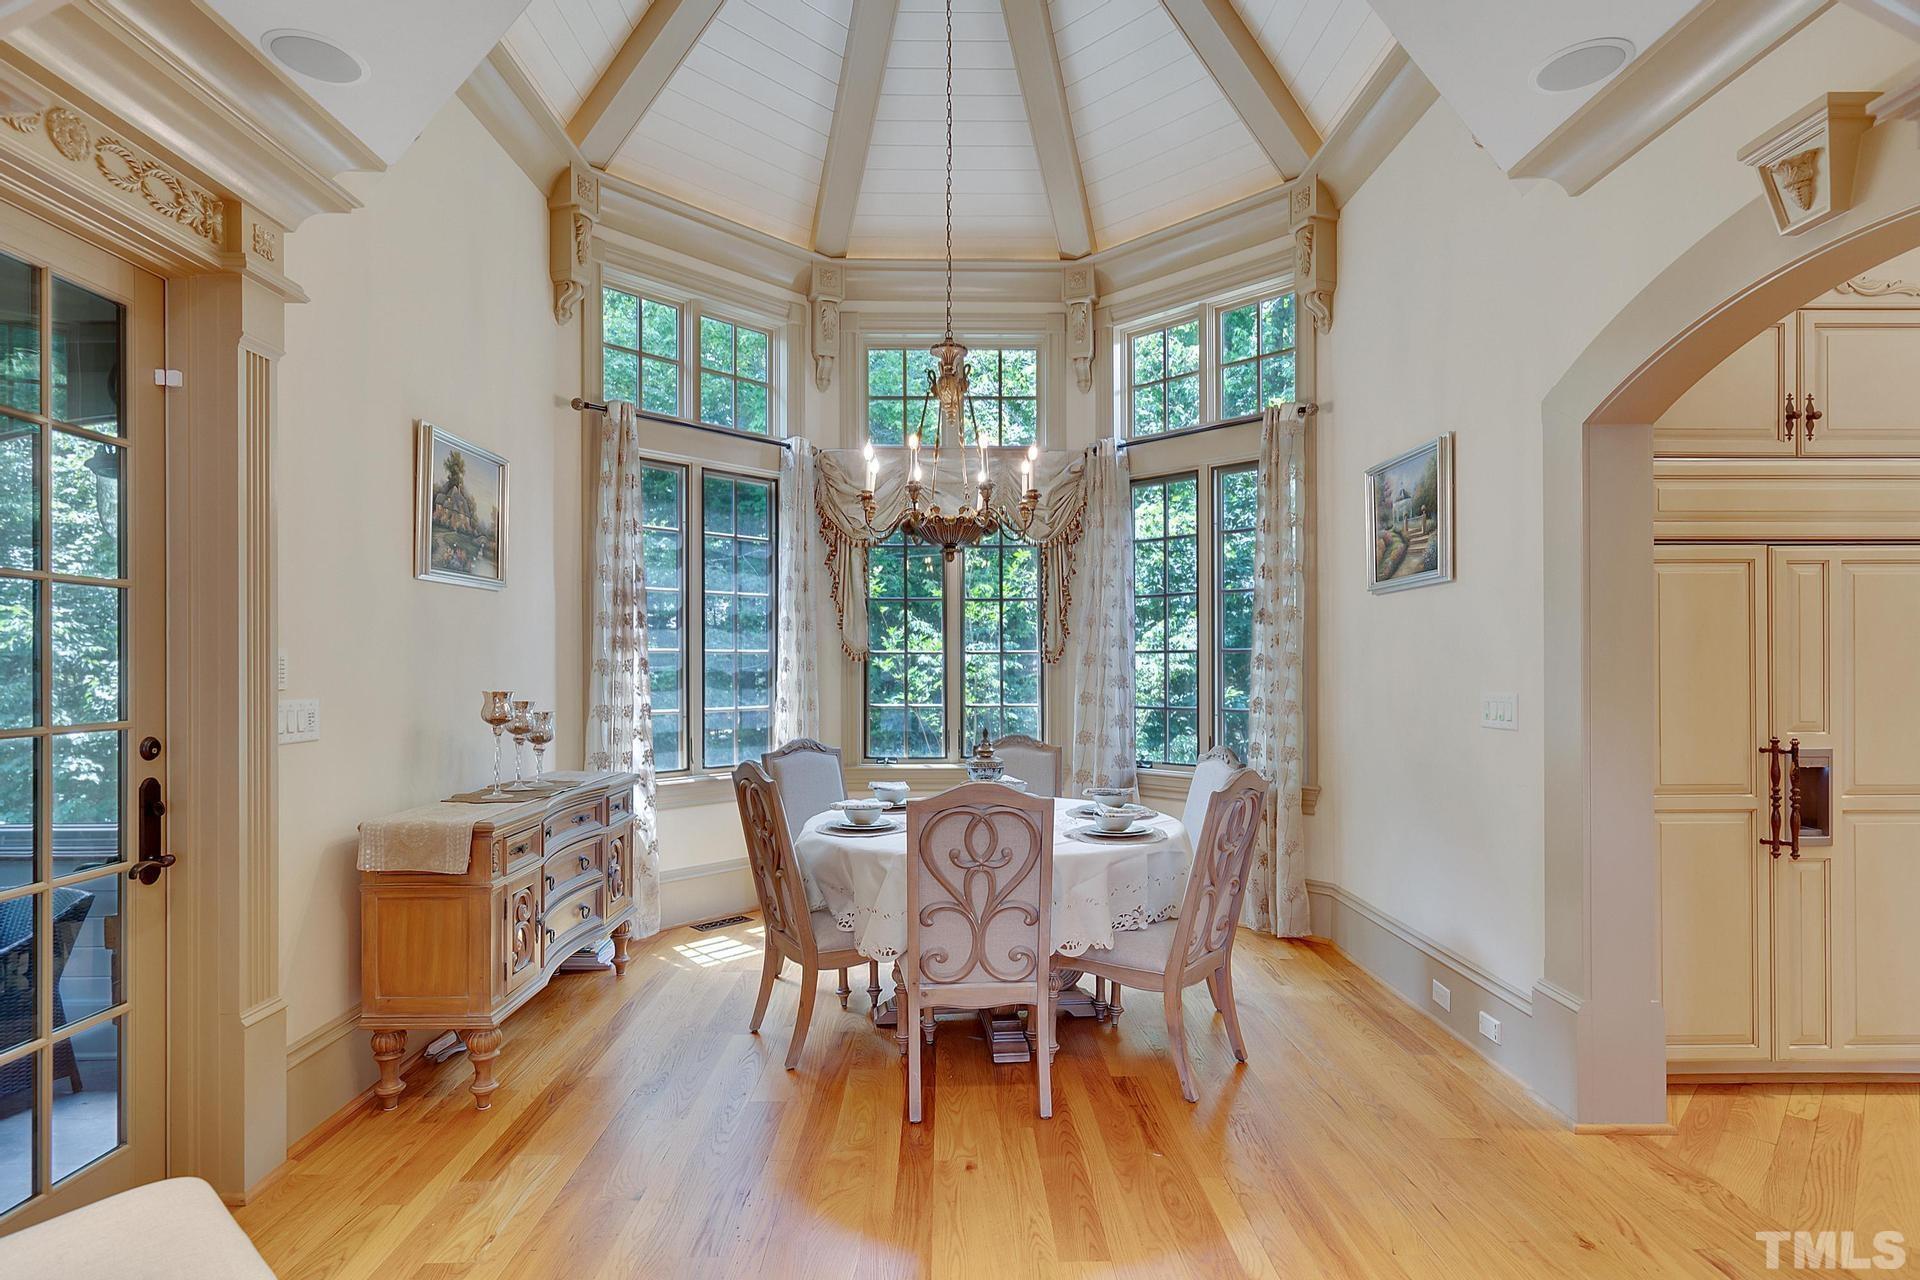 Enjoy your morning cup of coffee or tea under this beautiful domed ceiling.